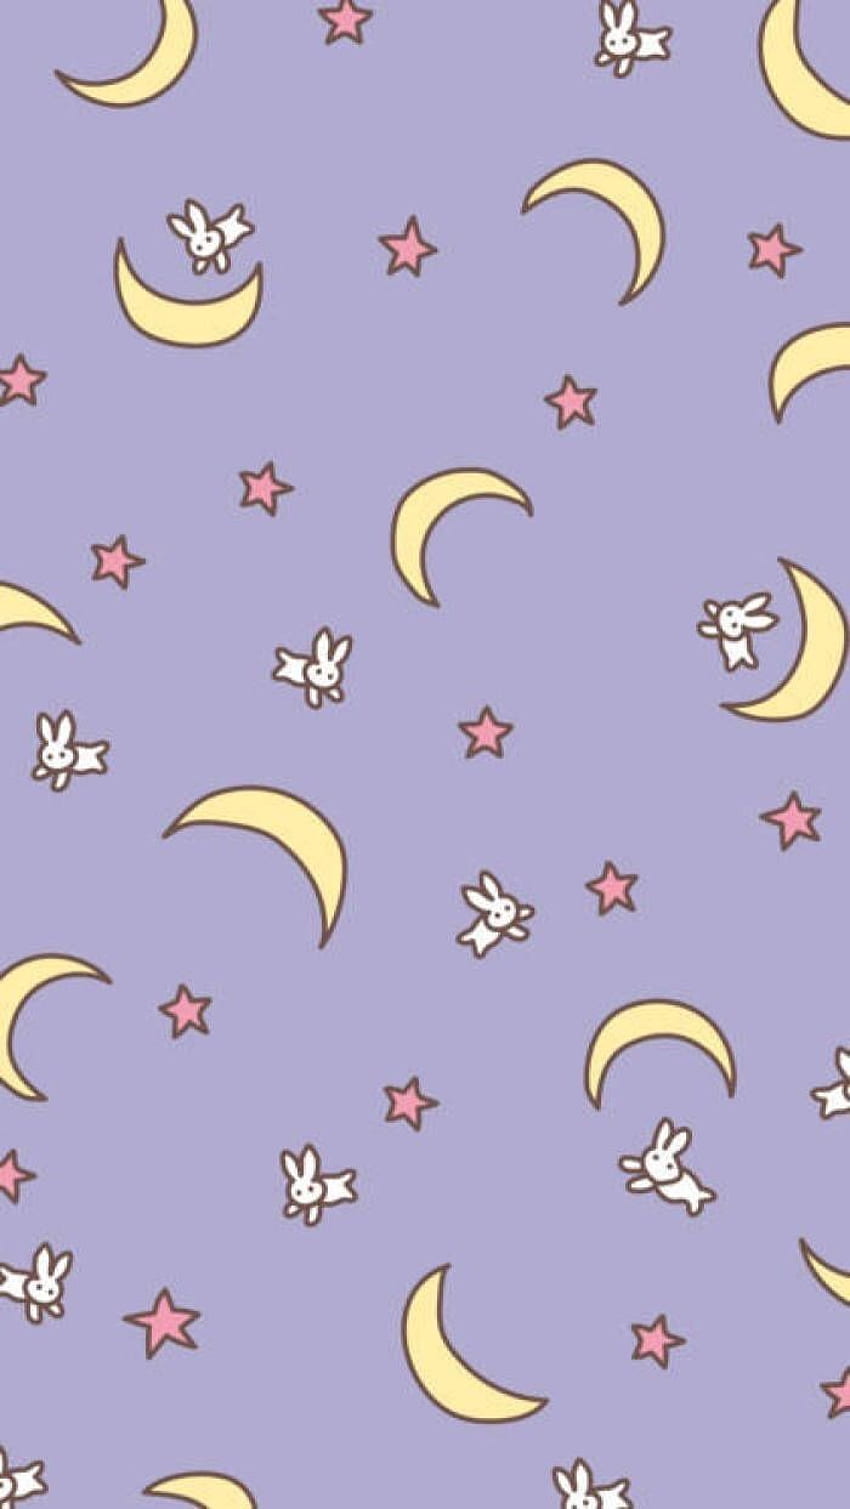 Wallpaper for phone cute, purple background, with white rabbit, pink stars and yellow moons, sailor moon inspired - Kidcore, Sailor Moon